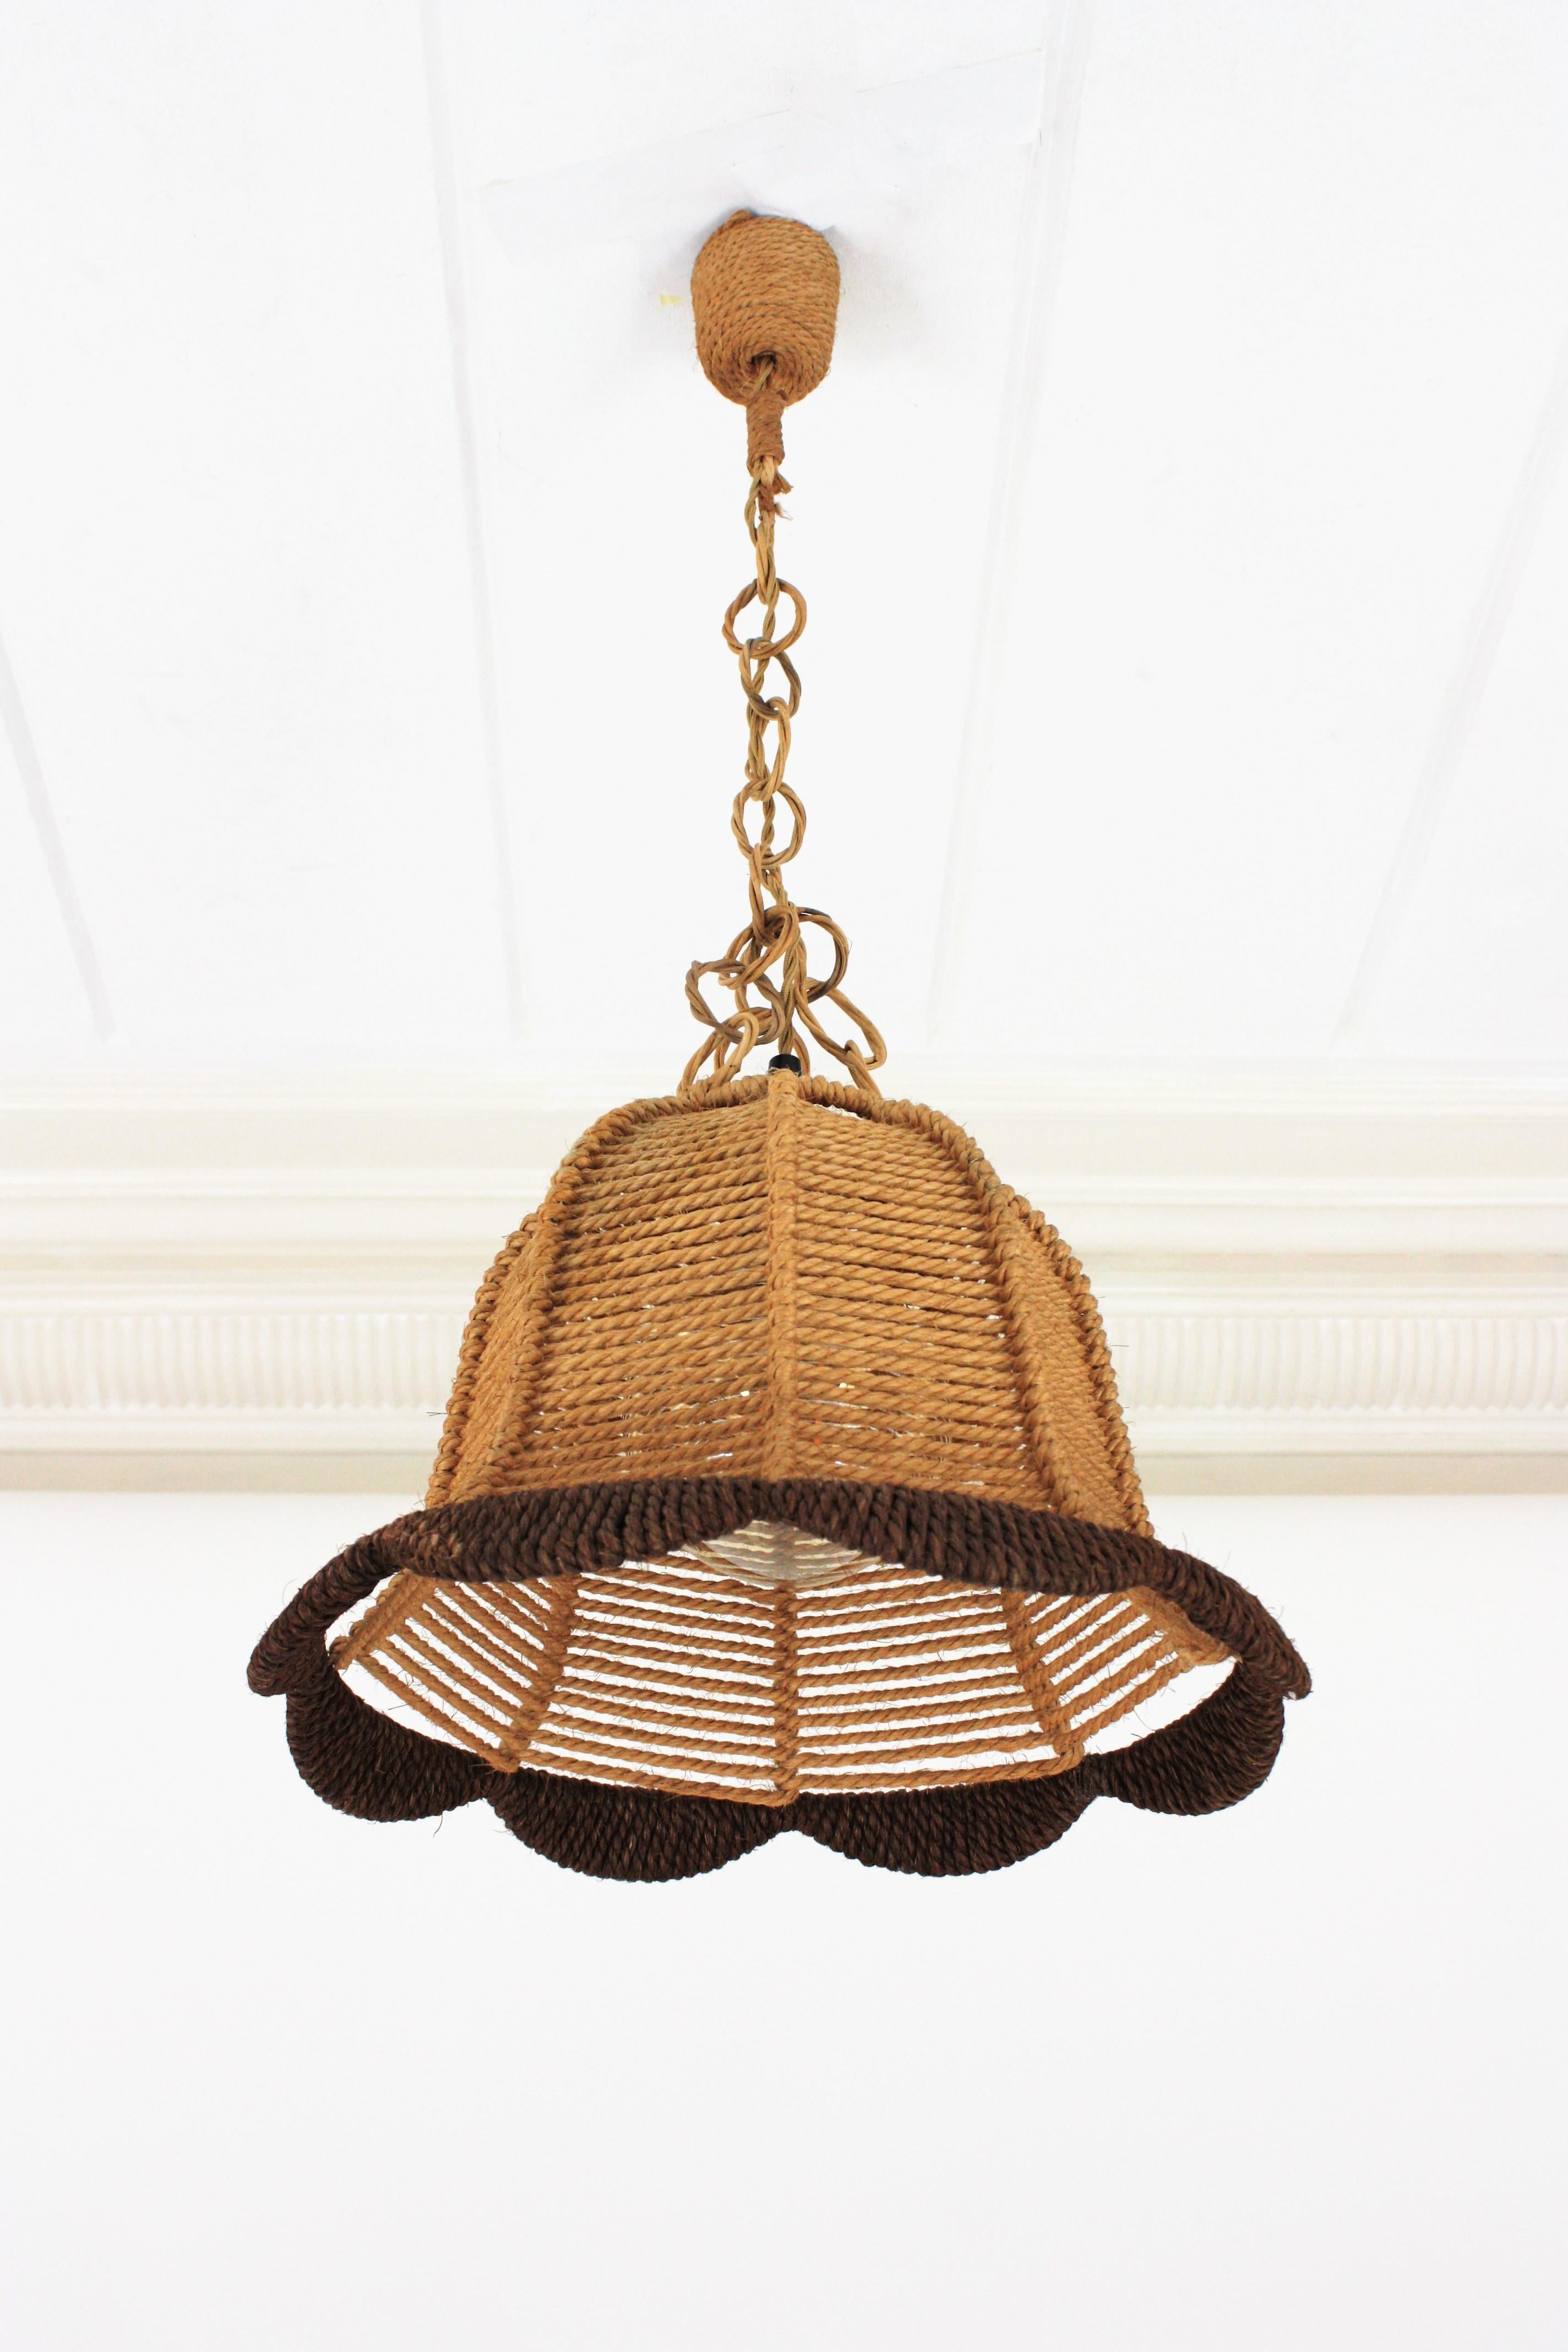 Rattan and Rope Bell Ceiling Pendant Light Hanging Lamp, Spain, 1960s 3